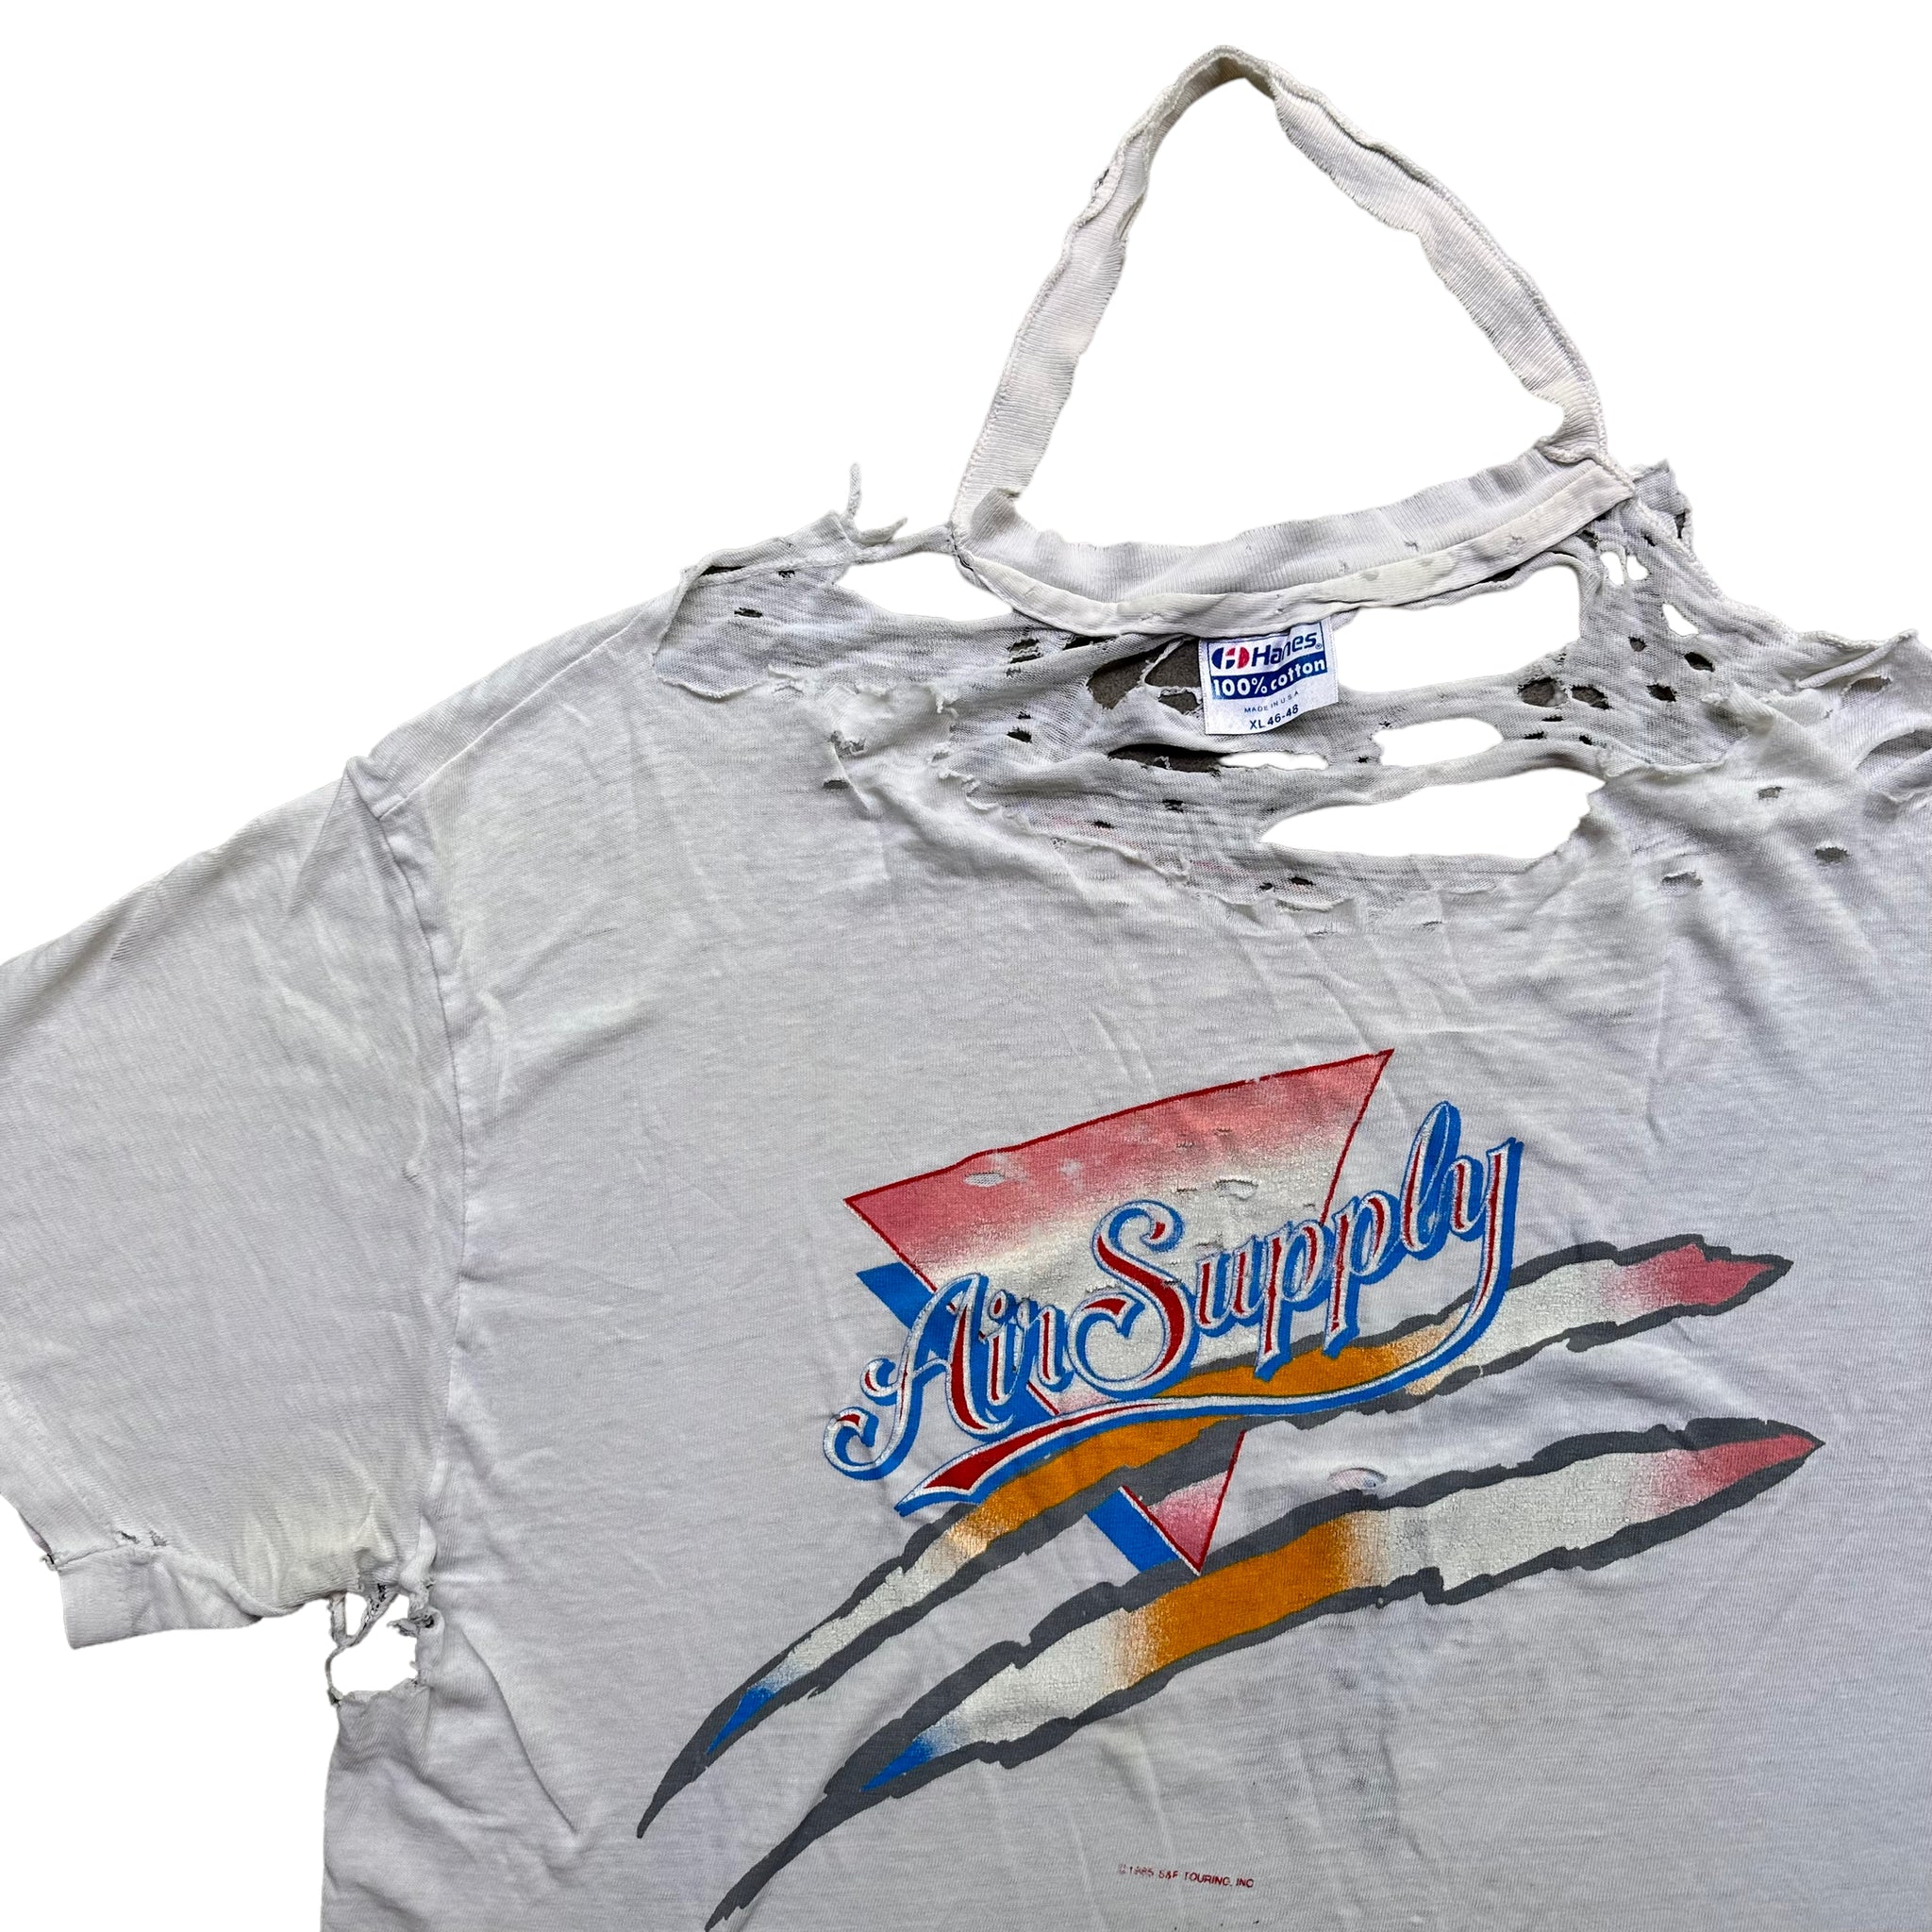 Destroyed 80s air supply tee M/L